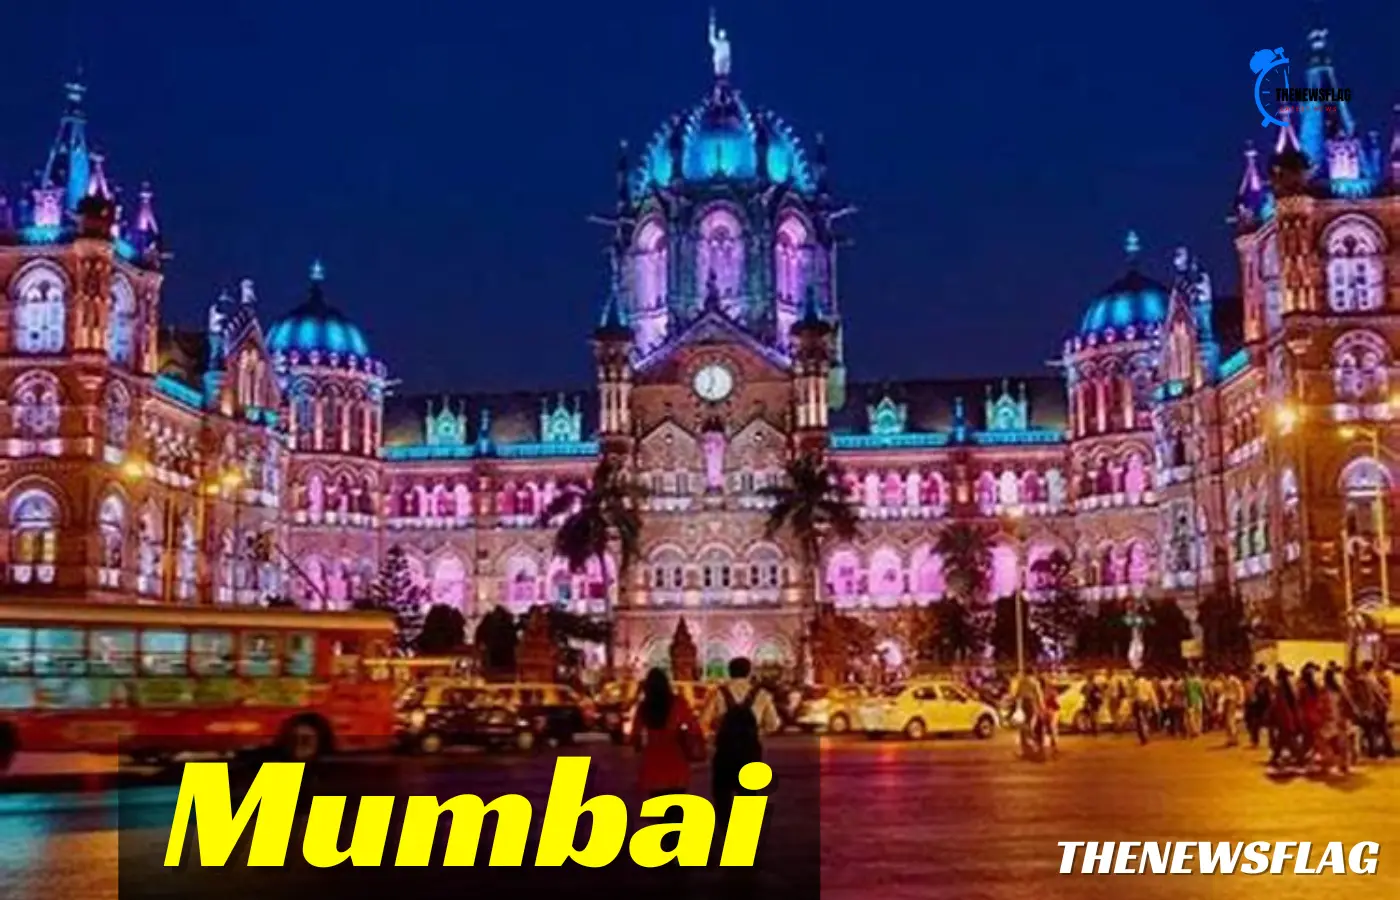 For the first time, Mumbai surpasses Beijing to become the capital of billionaires in Asia.